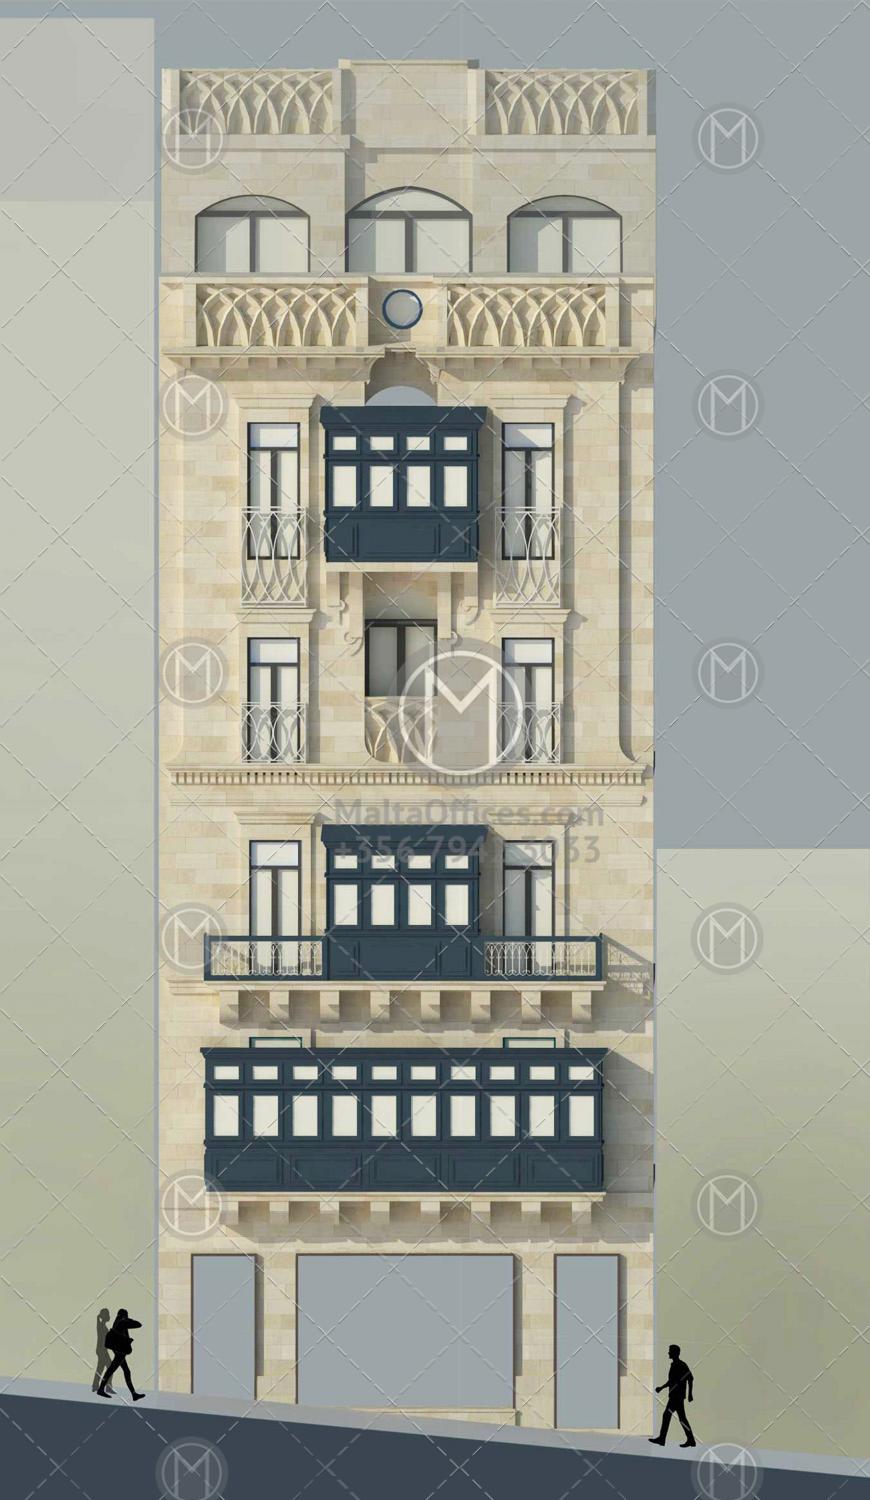 Sliema Office Building for Rent